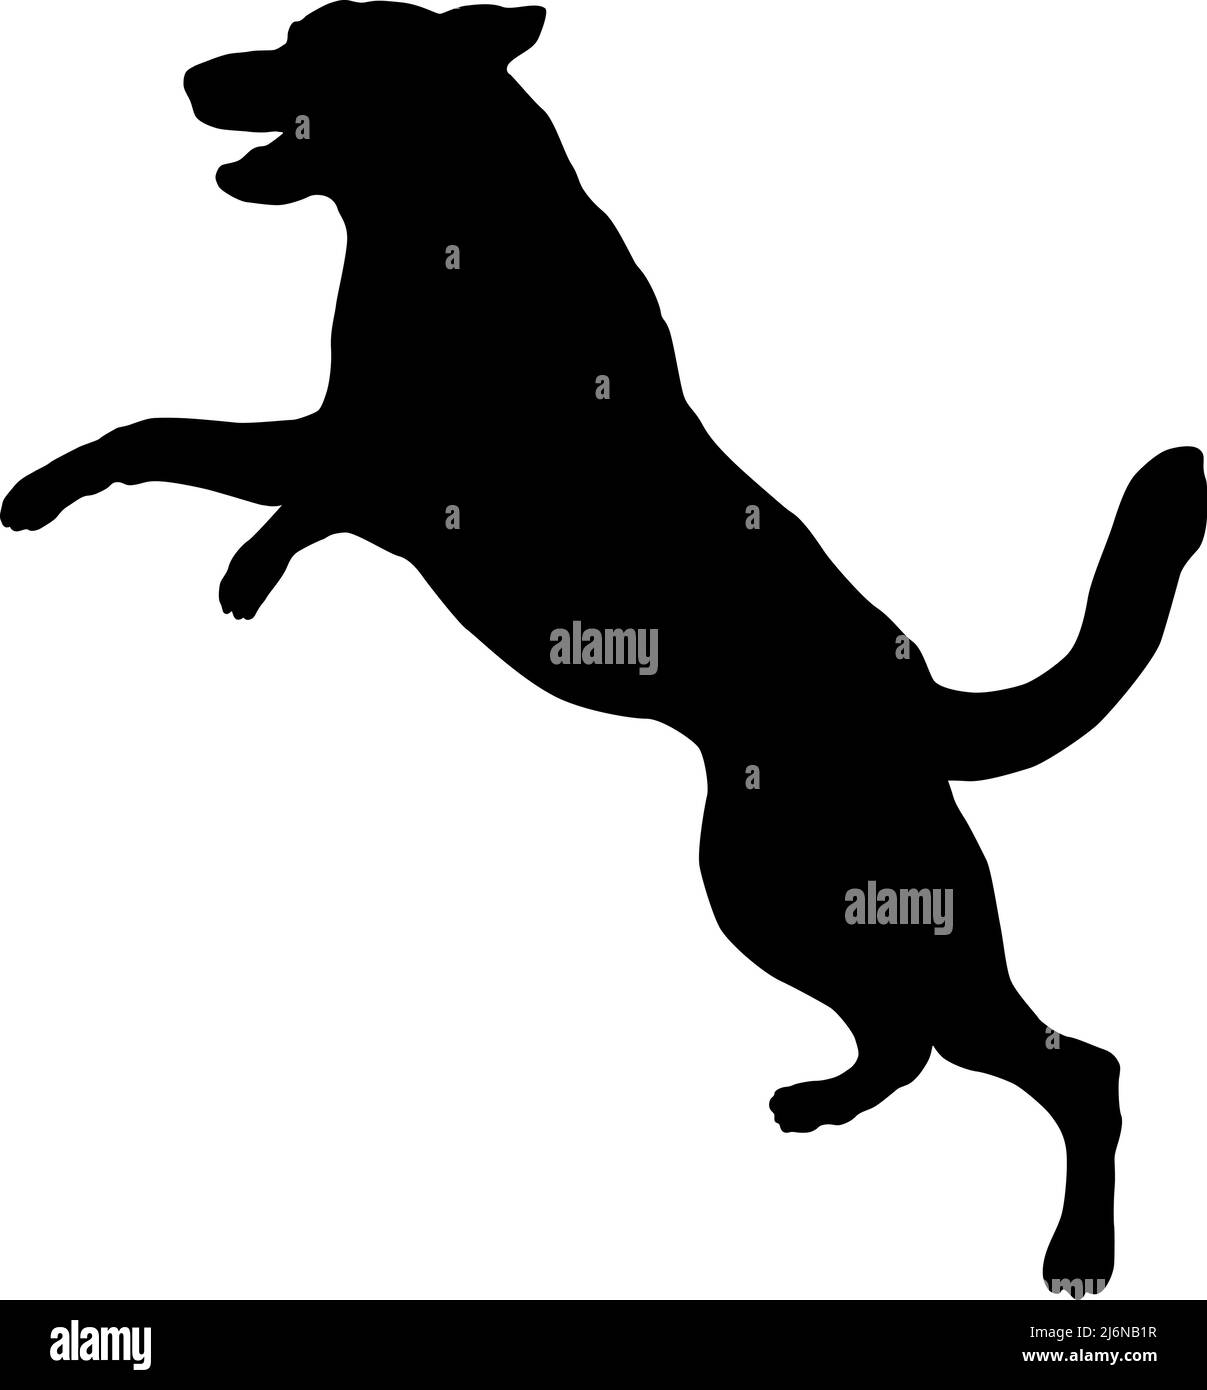 Black dog silhouette. Jumping east european shepherd. Pet animals. Isolated on a white background. Vector illustration. Stock Vector